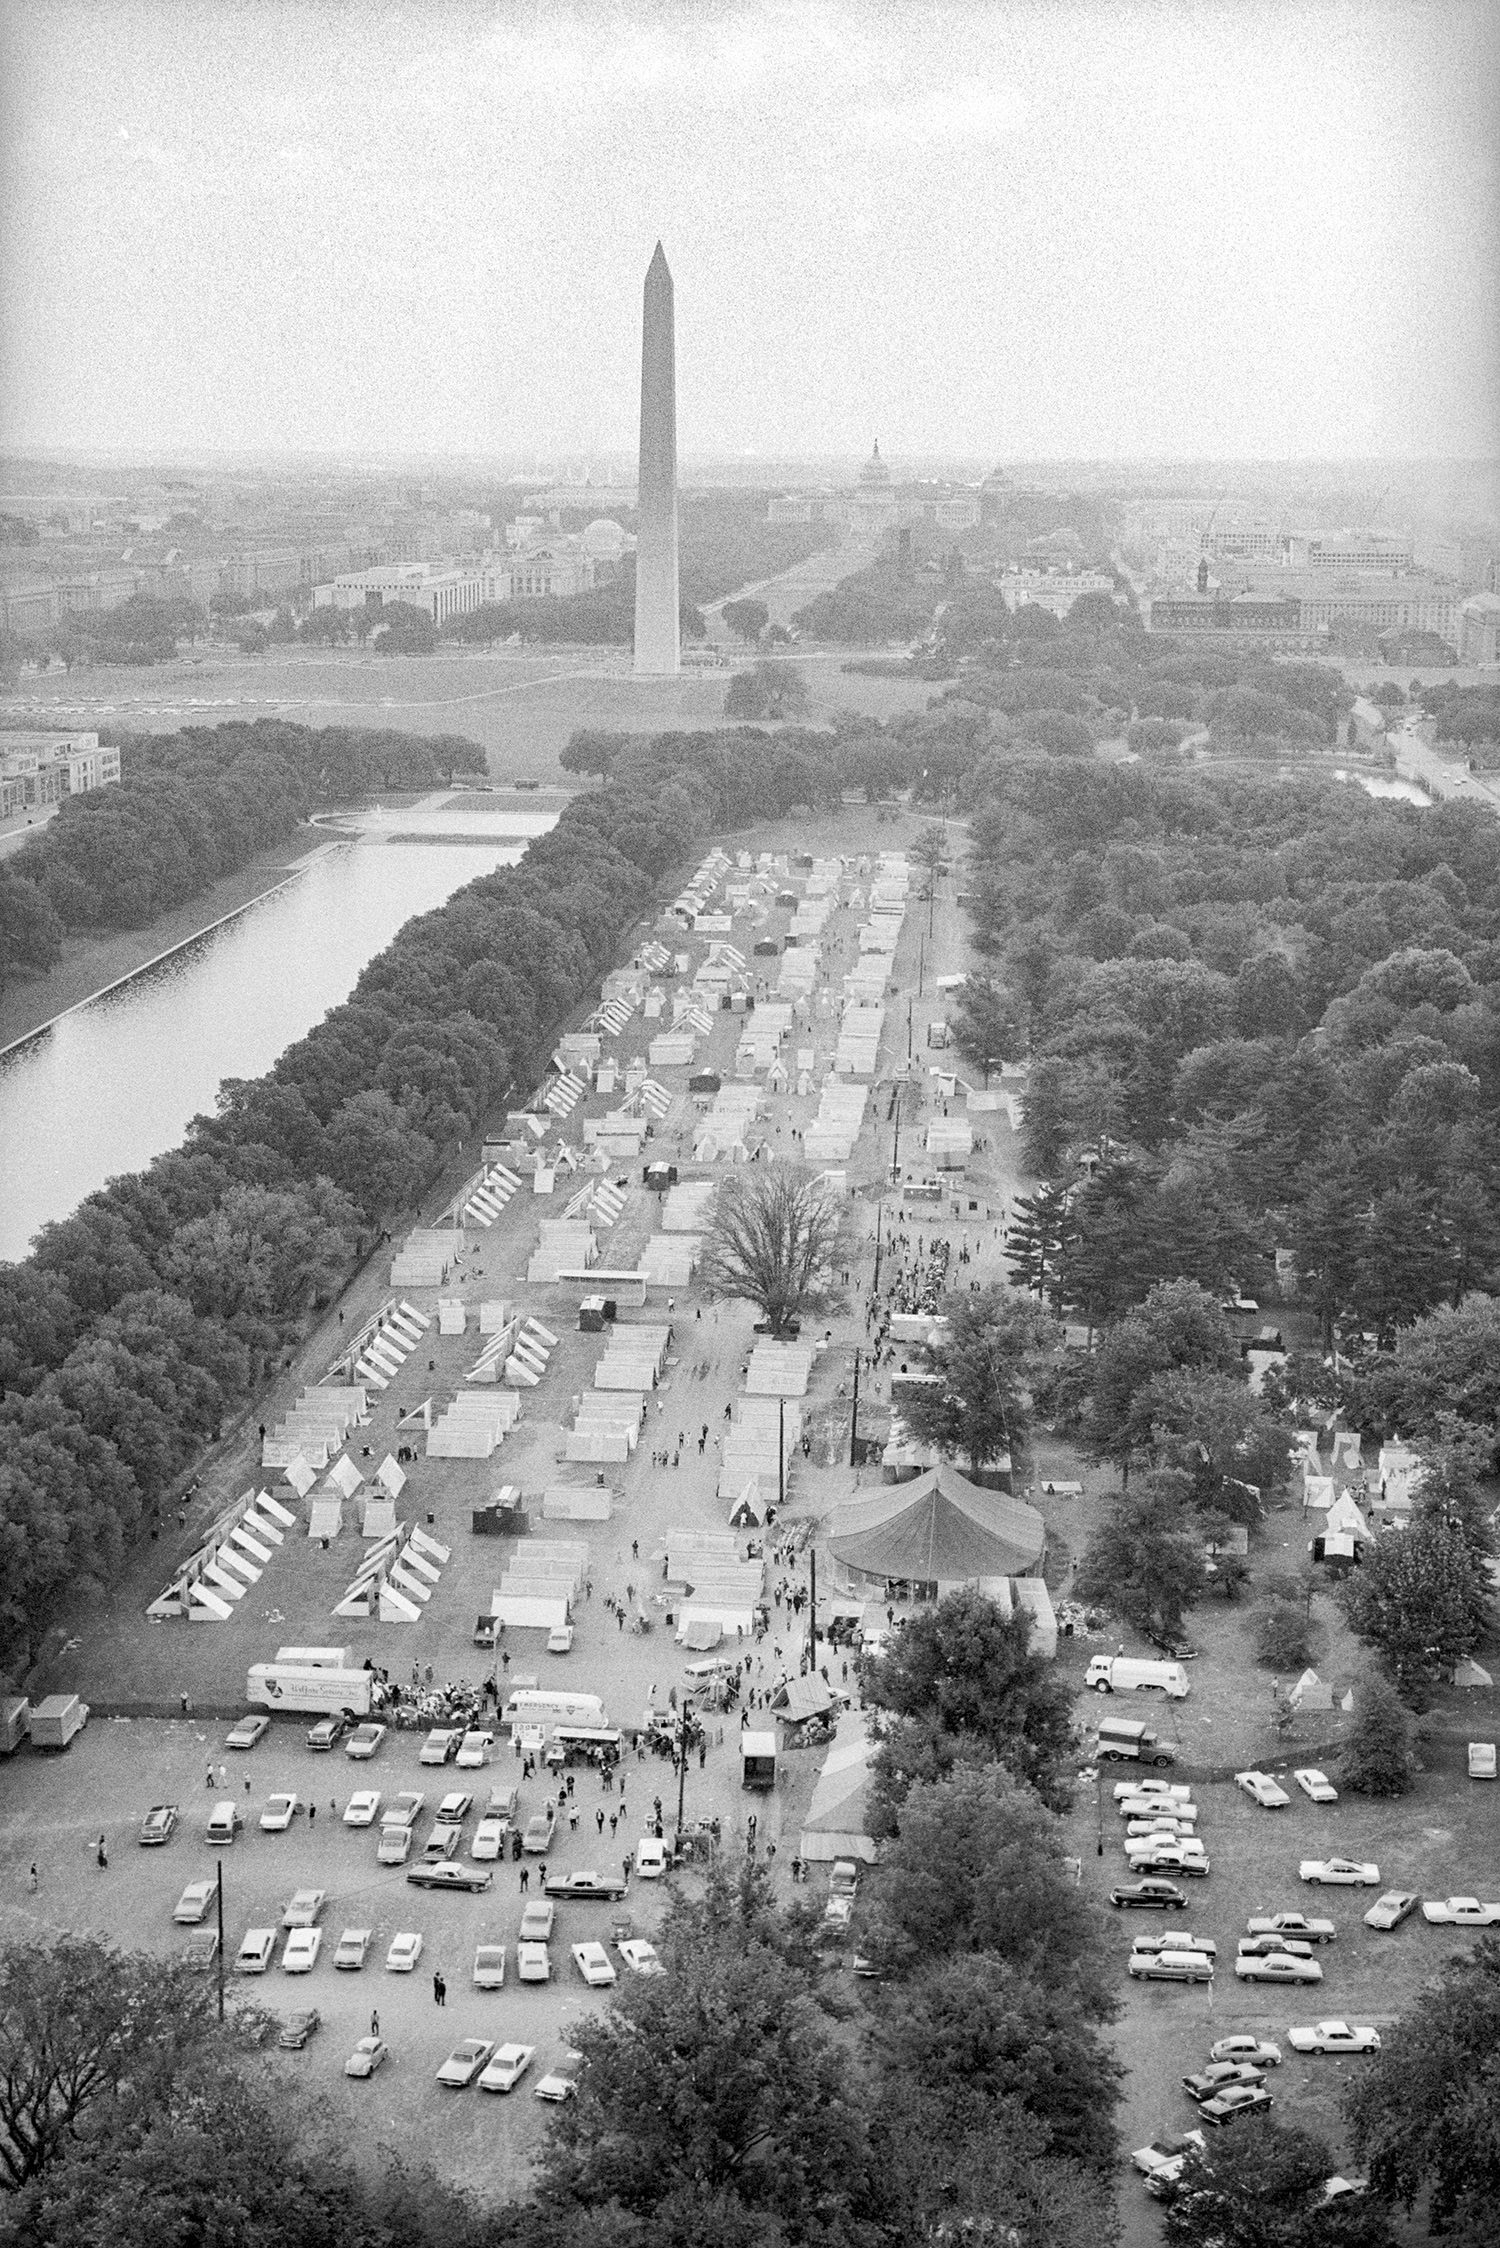 An aerial view of the National Mall in Washington, DC, covered in rows of tents, with the Washington Monument visible in the background. 